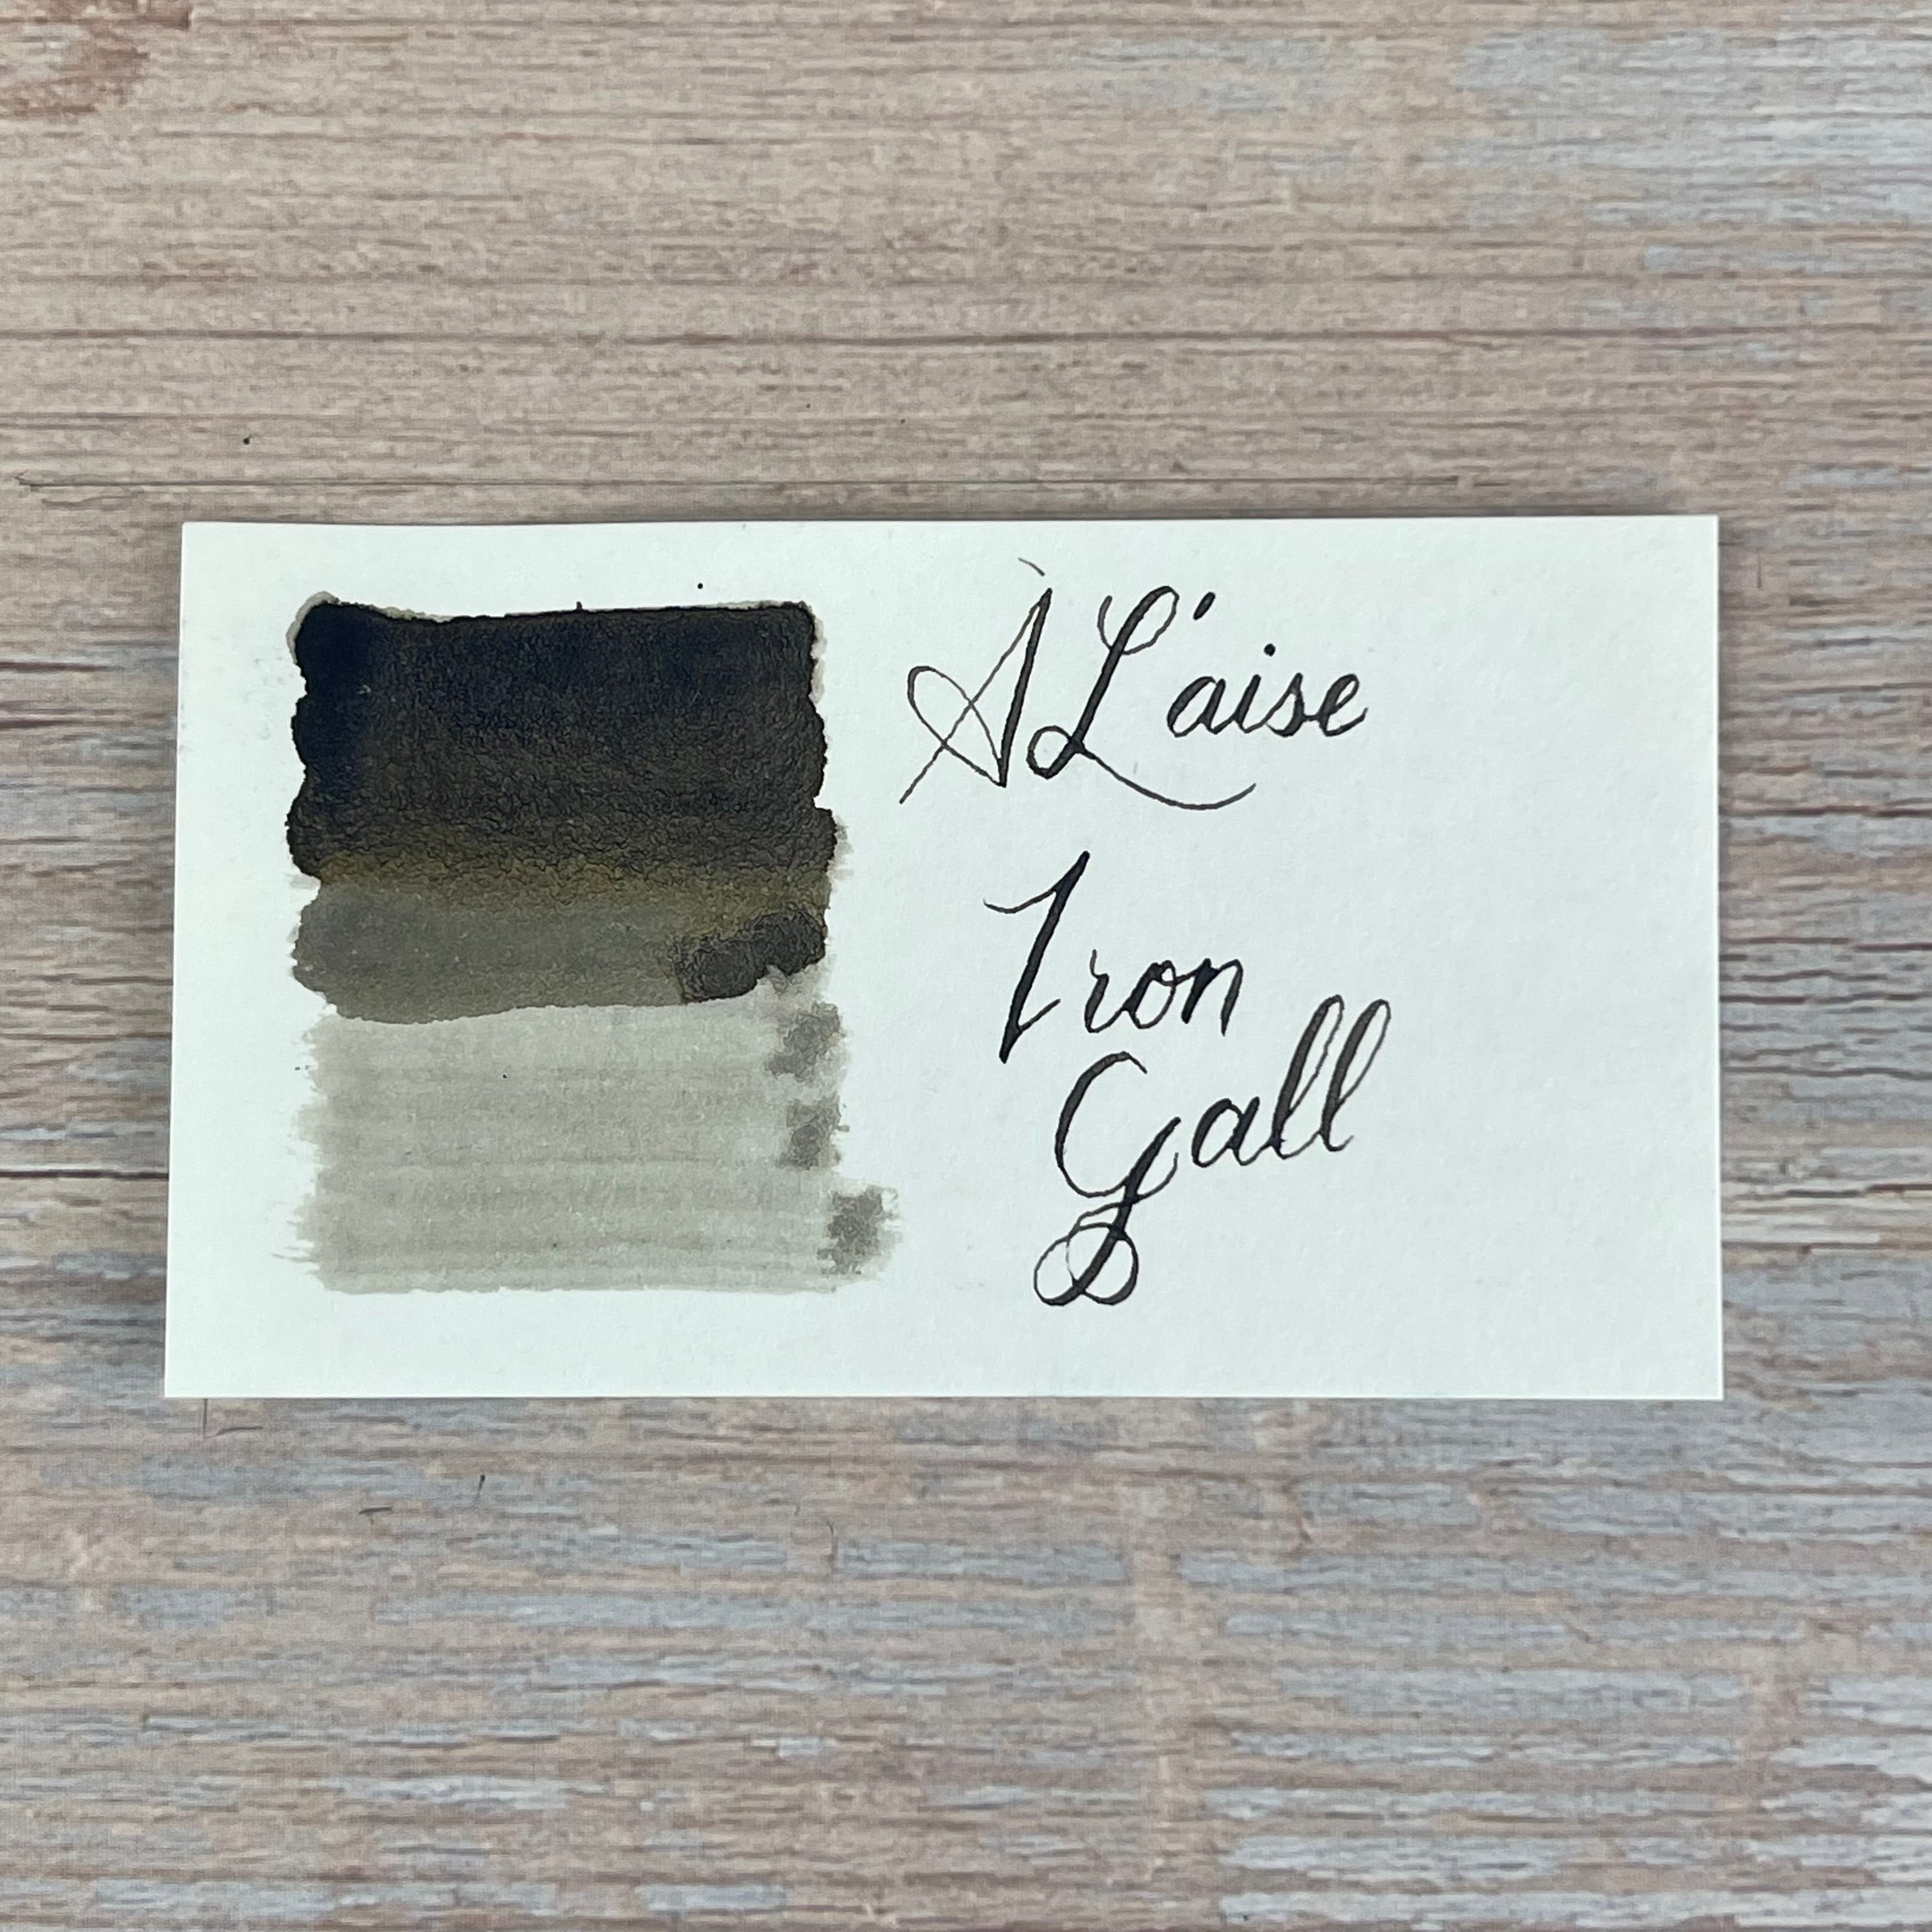 Copper Modern Calligraphy Ink